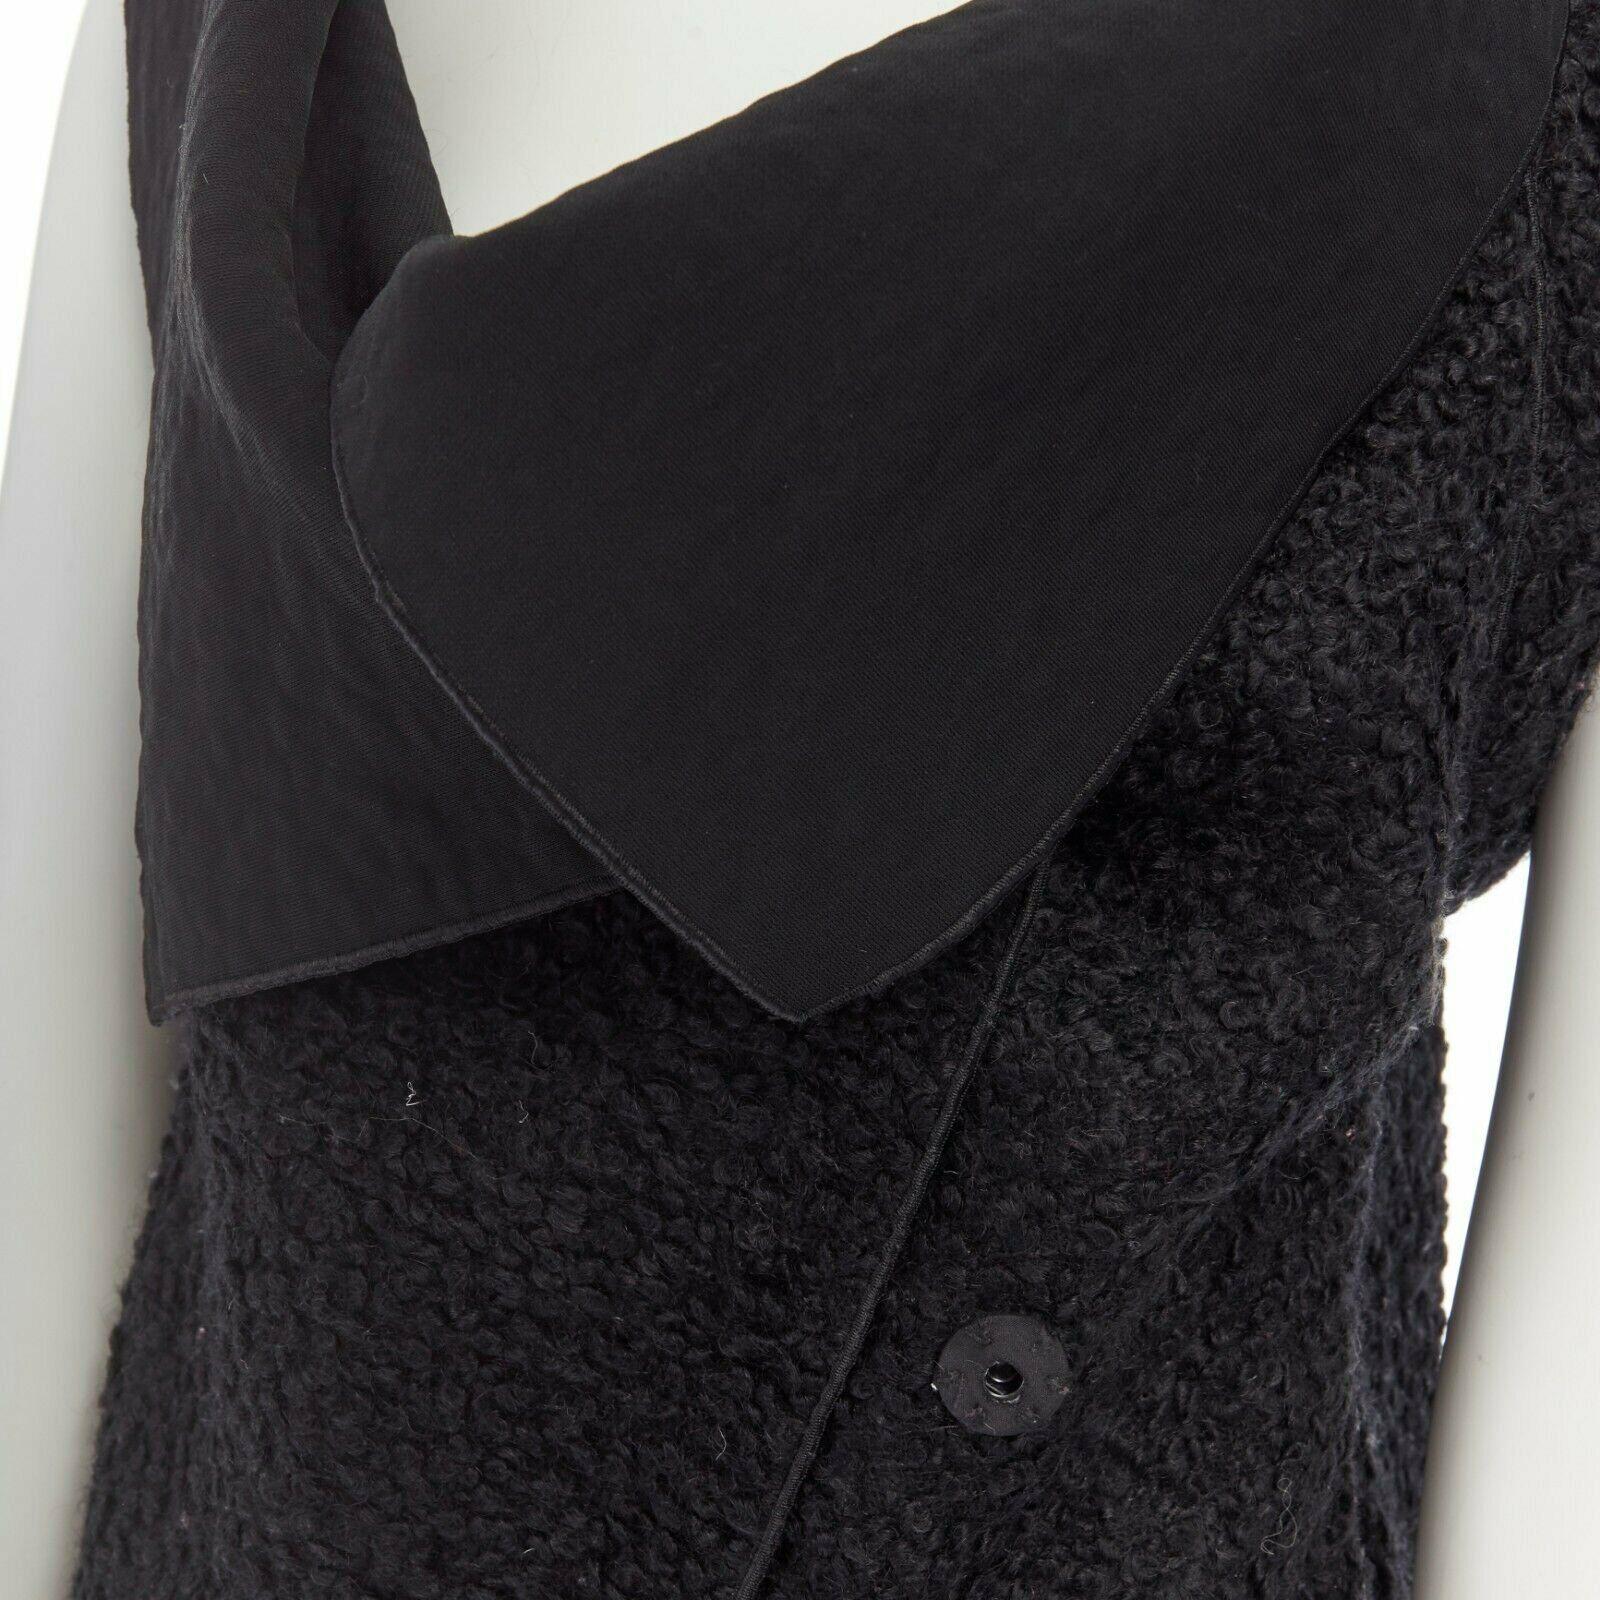 RM ROLAND MOURET wool mohair blend draped collar sleeveless vest jacket US6 M
Reference: CC/CECG00202
Brand: Roland Mouret
Material: Wool
Color: Black
Pattern: Solid
Closure: Button
Extra Details: Wool, mohair, polyamide. Black. Textured wool outer.